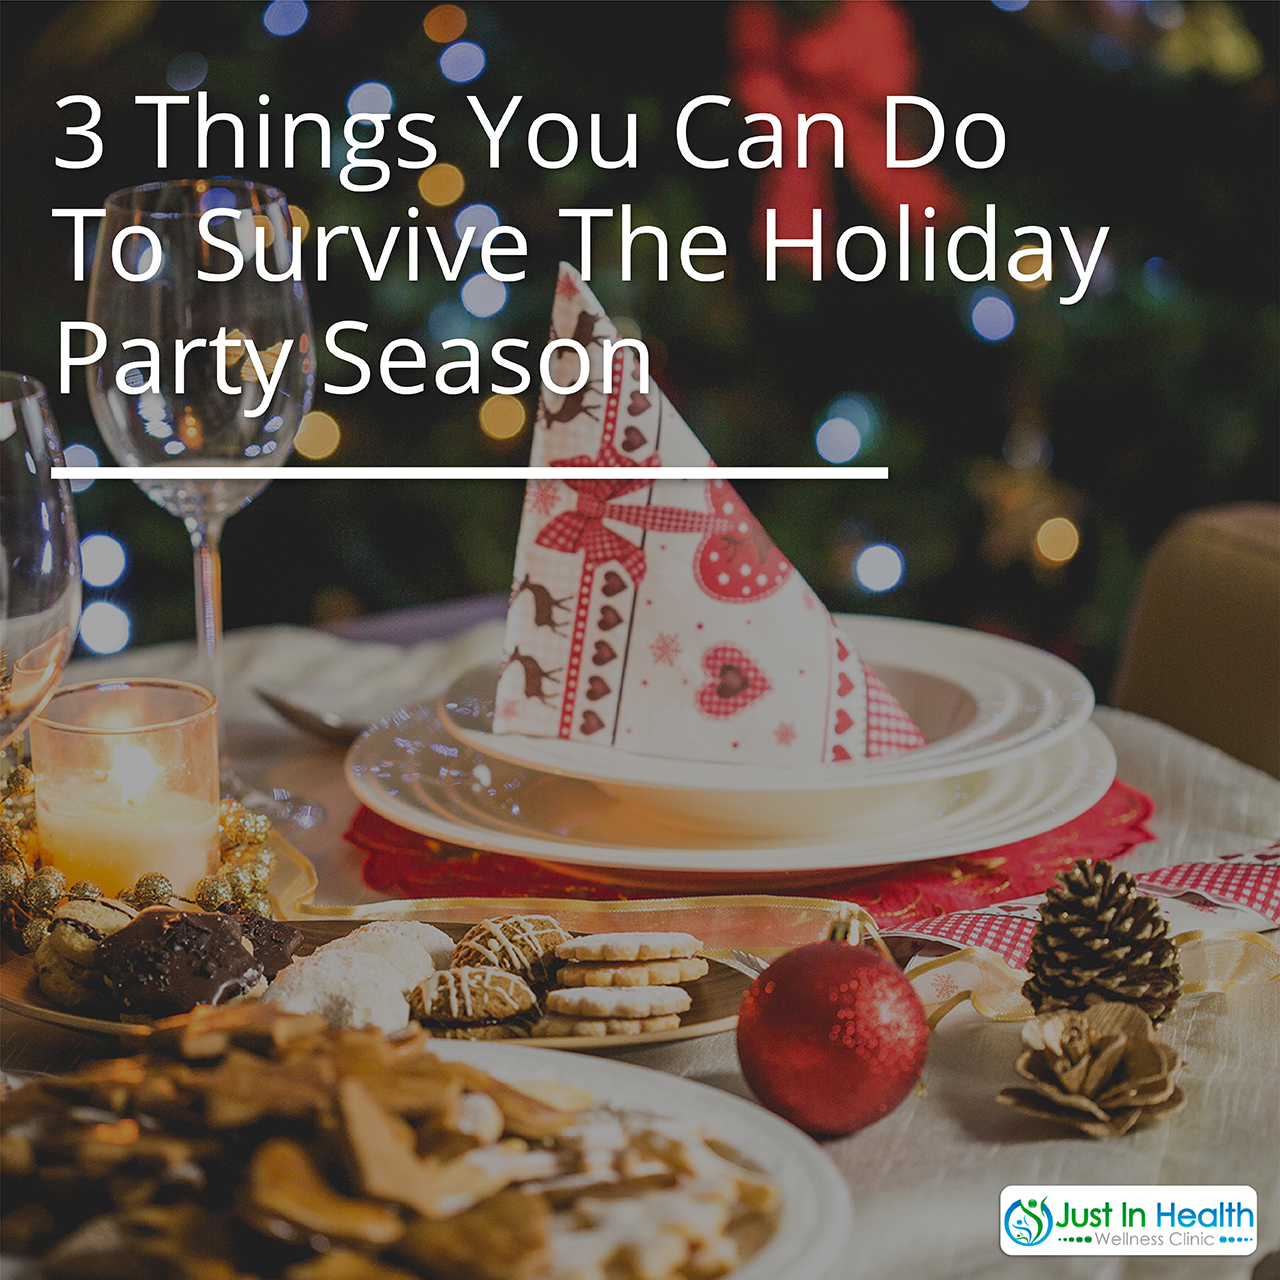 3 Things You Can Do To Survive The Holiday Party Season